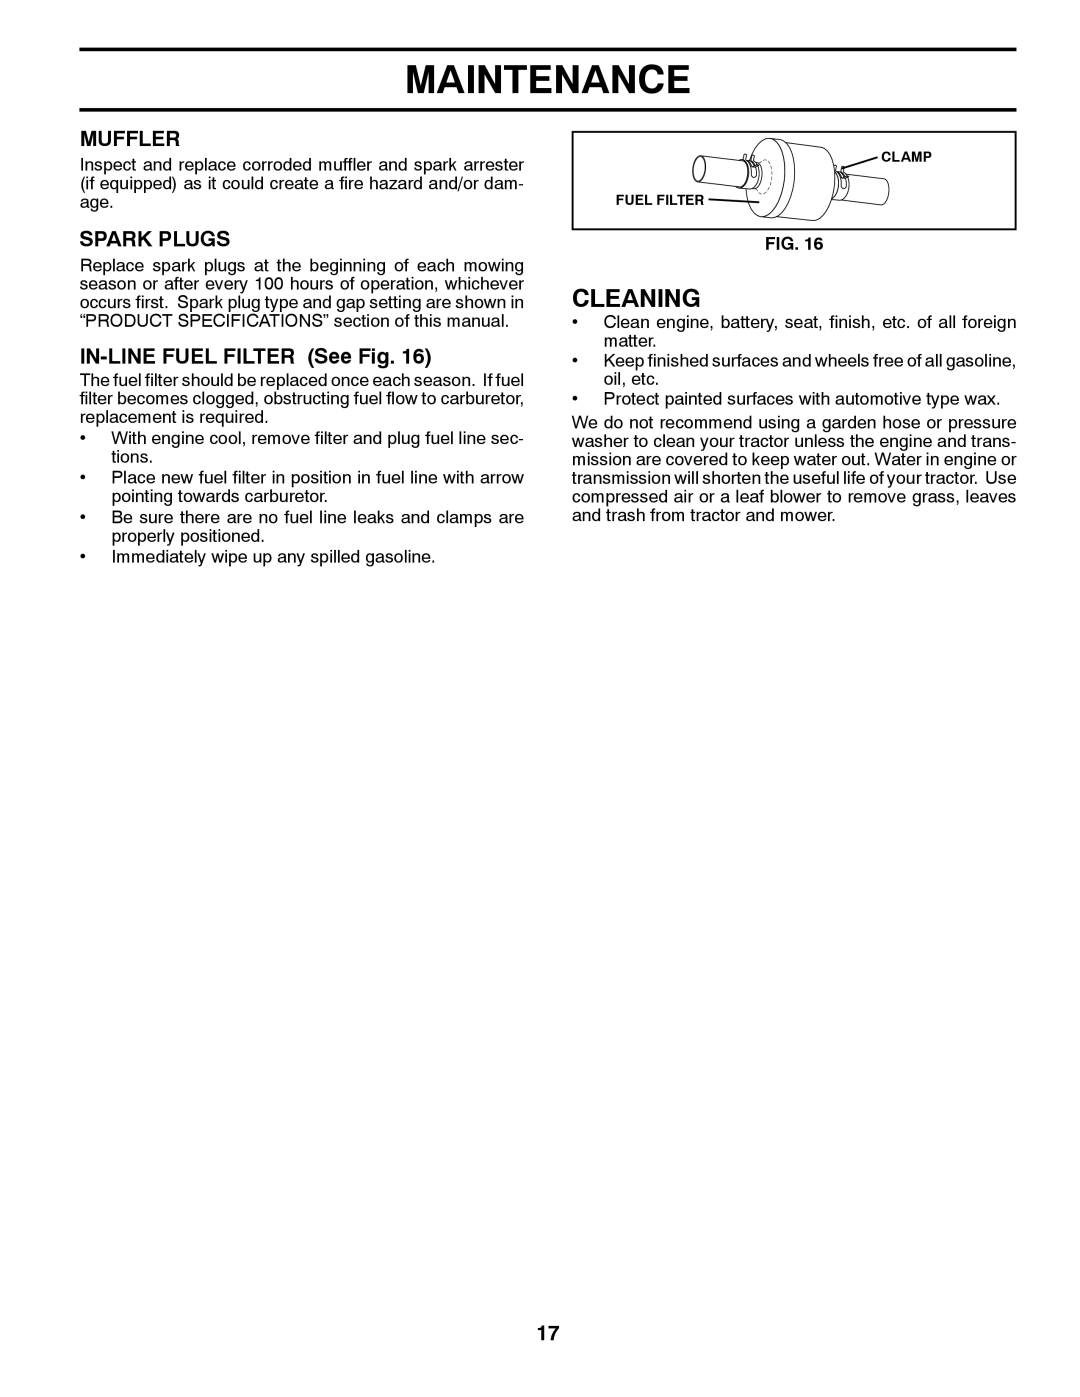 Husqvarna YTH2246 owner manual Cleaning, Muffler, Spark Plugs, IN-LINE FUEL FILTER See Fig, Maintenance 